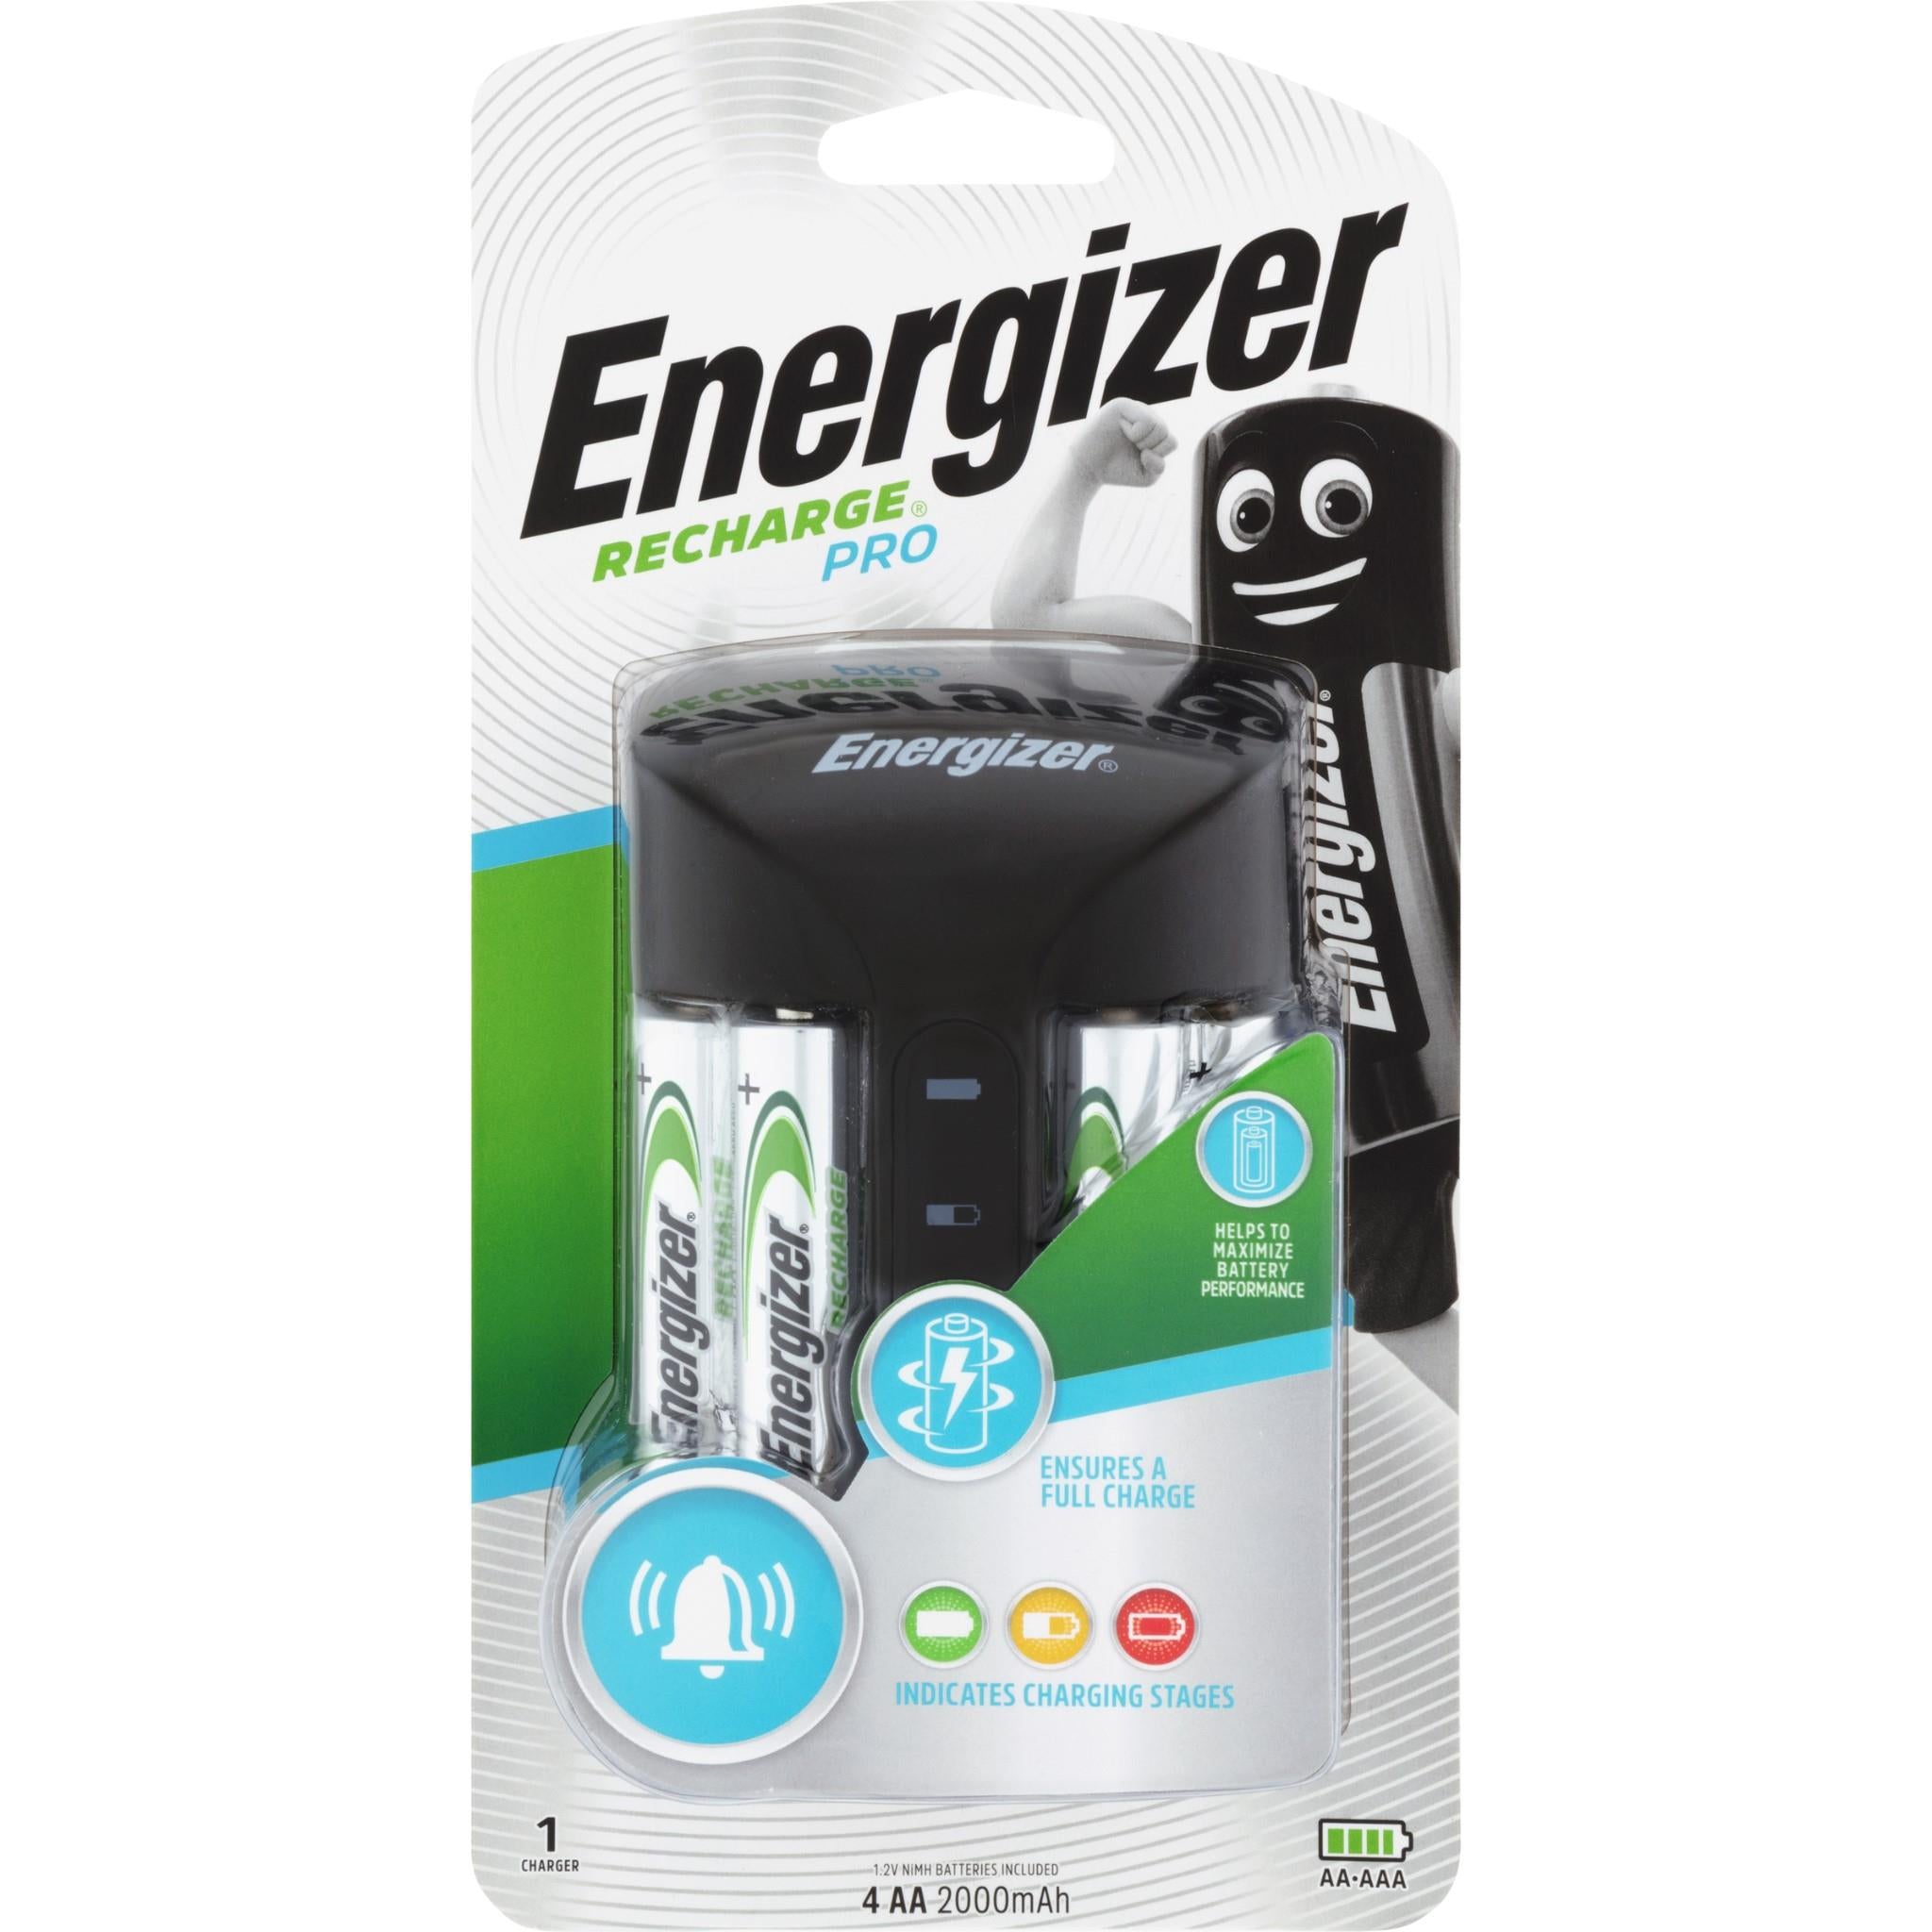 energizer pro charger with 4 aa batteries